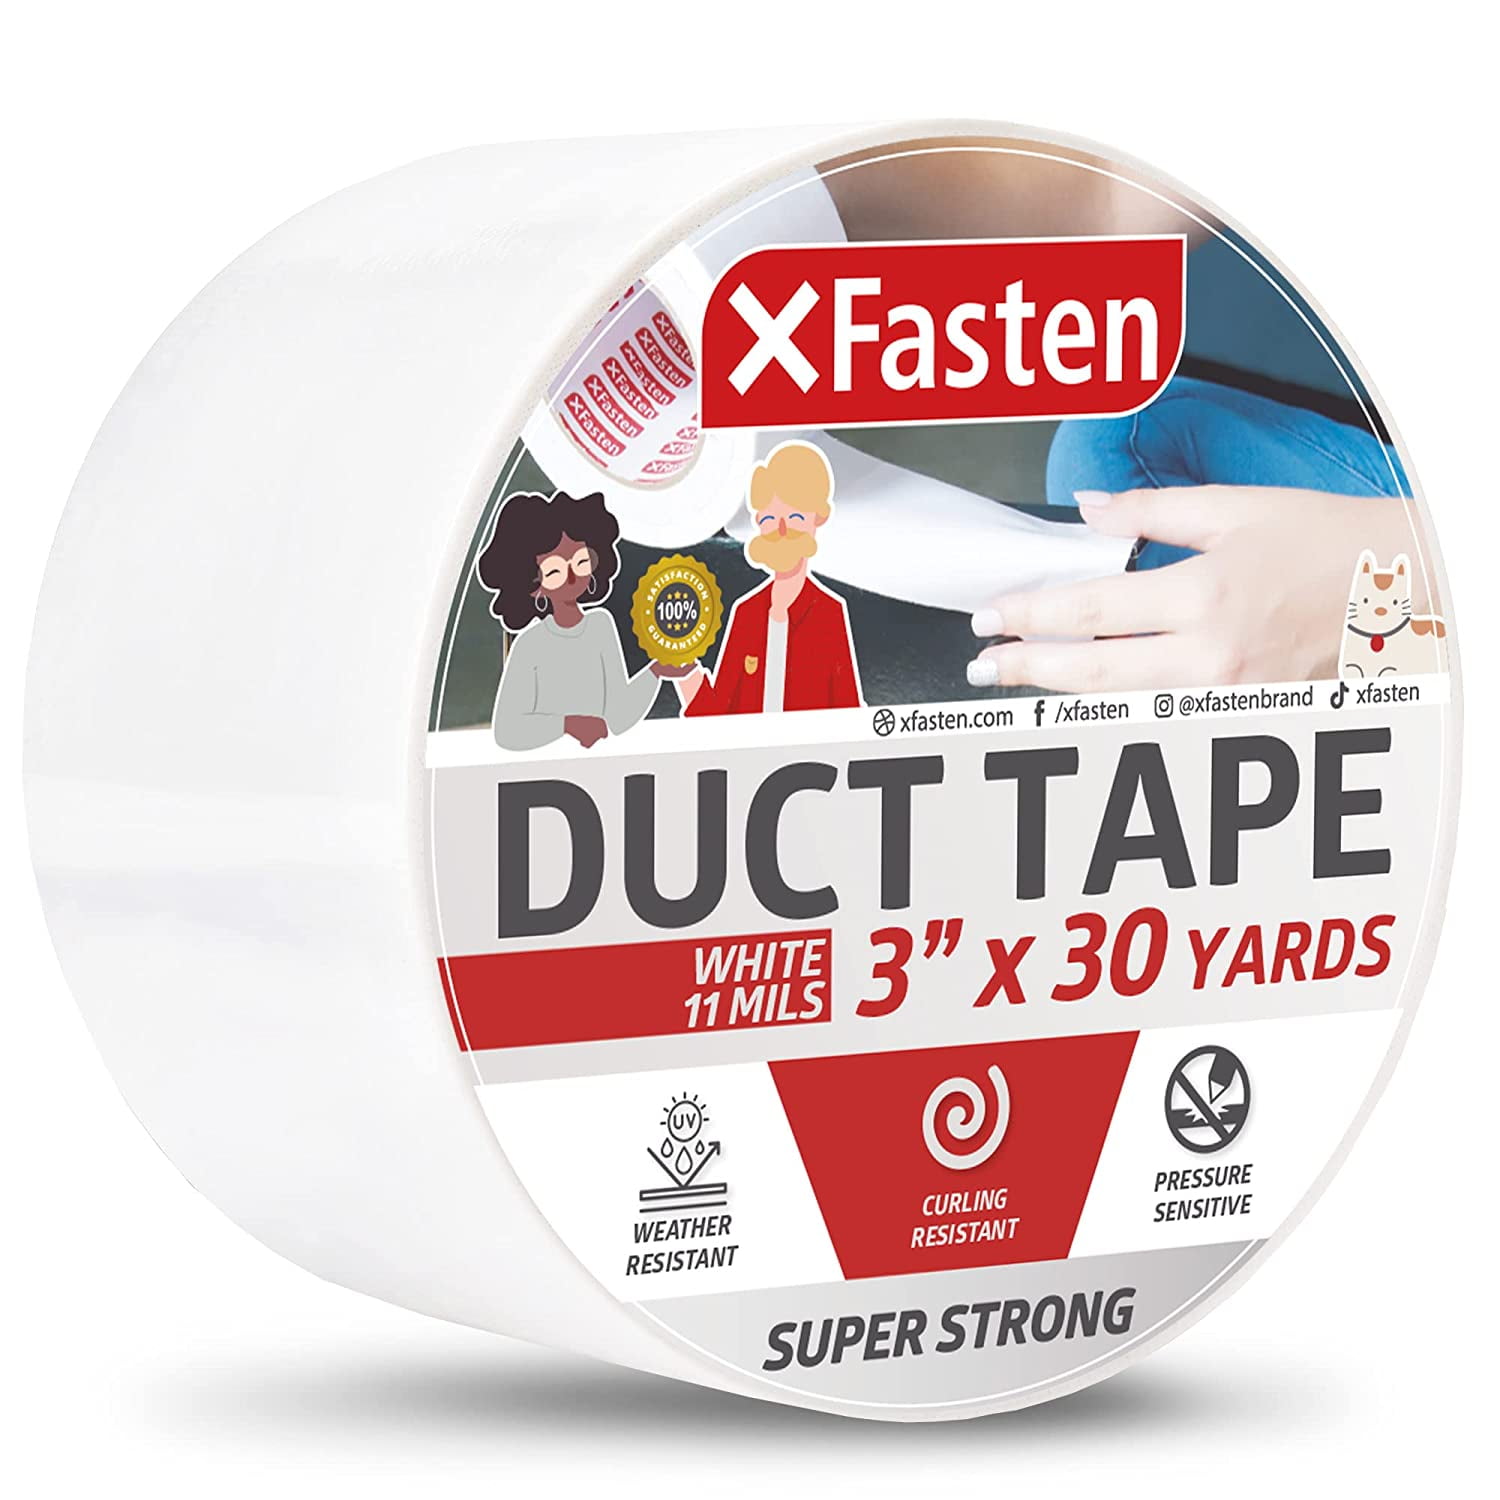 XFasten Double Sided Carpet Tape 2-Inch x 30 Yards